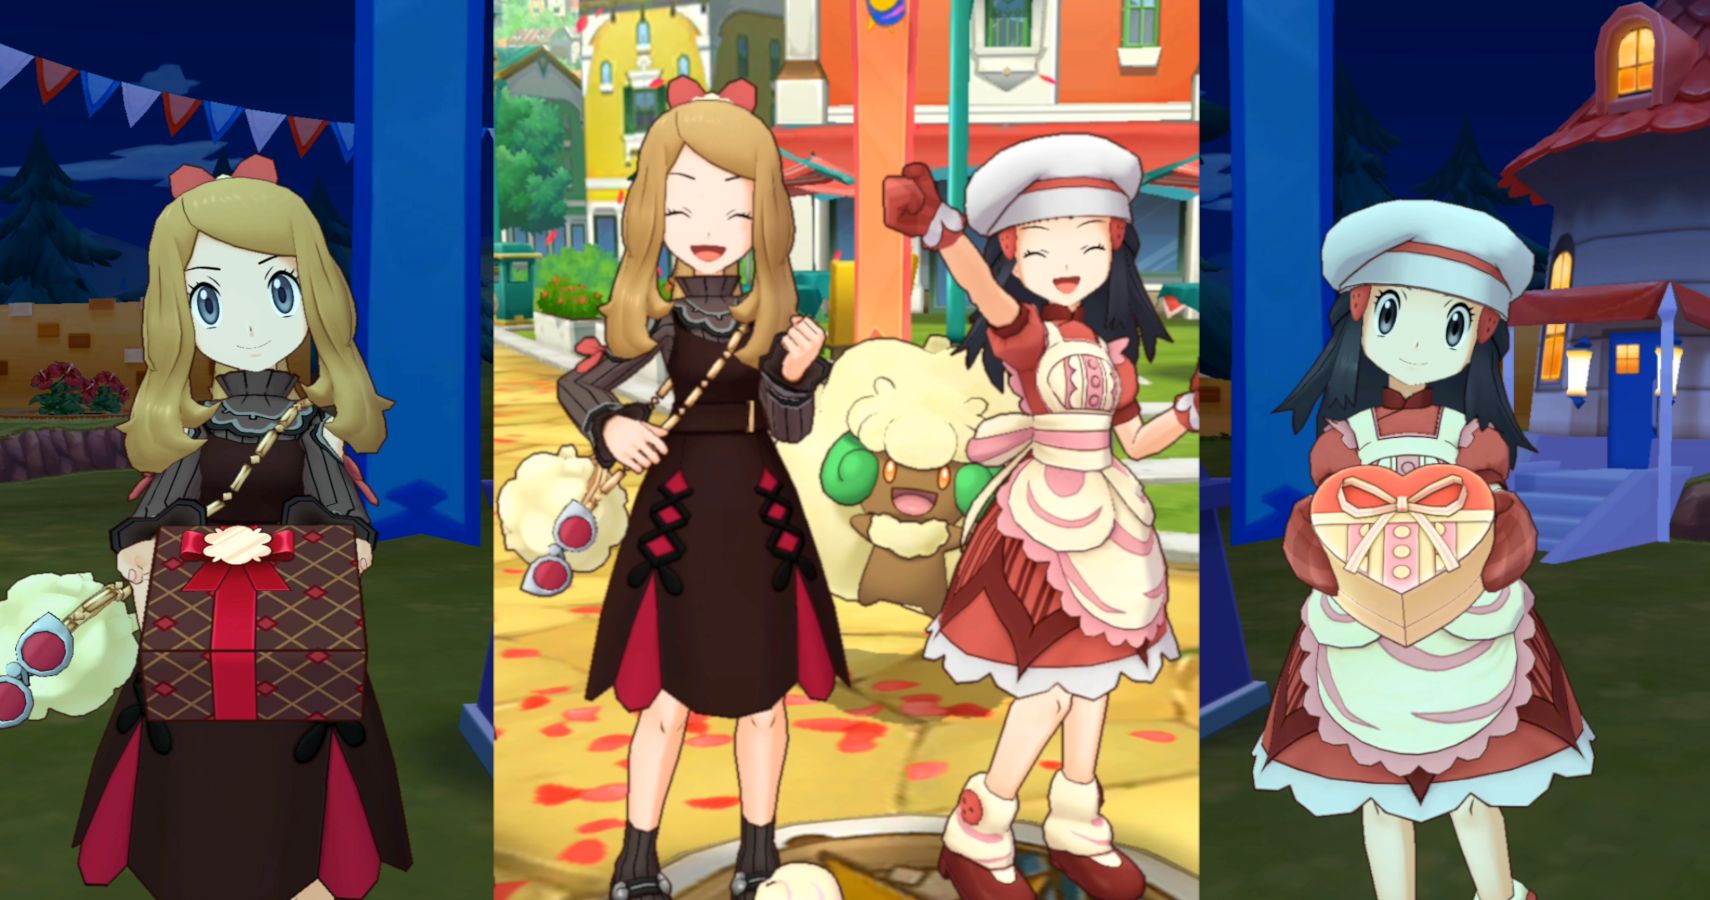 Pokemon Masters EX Celebrates Palentine's Day With New Dawn And Serena Sync  Pairs